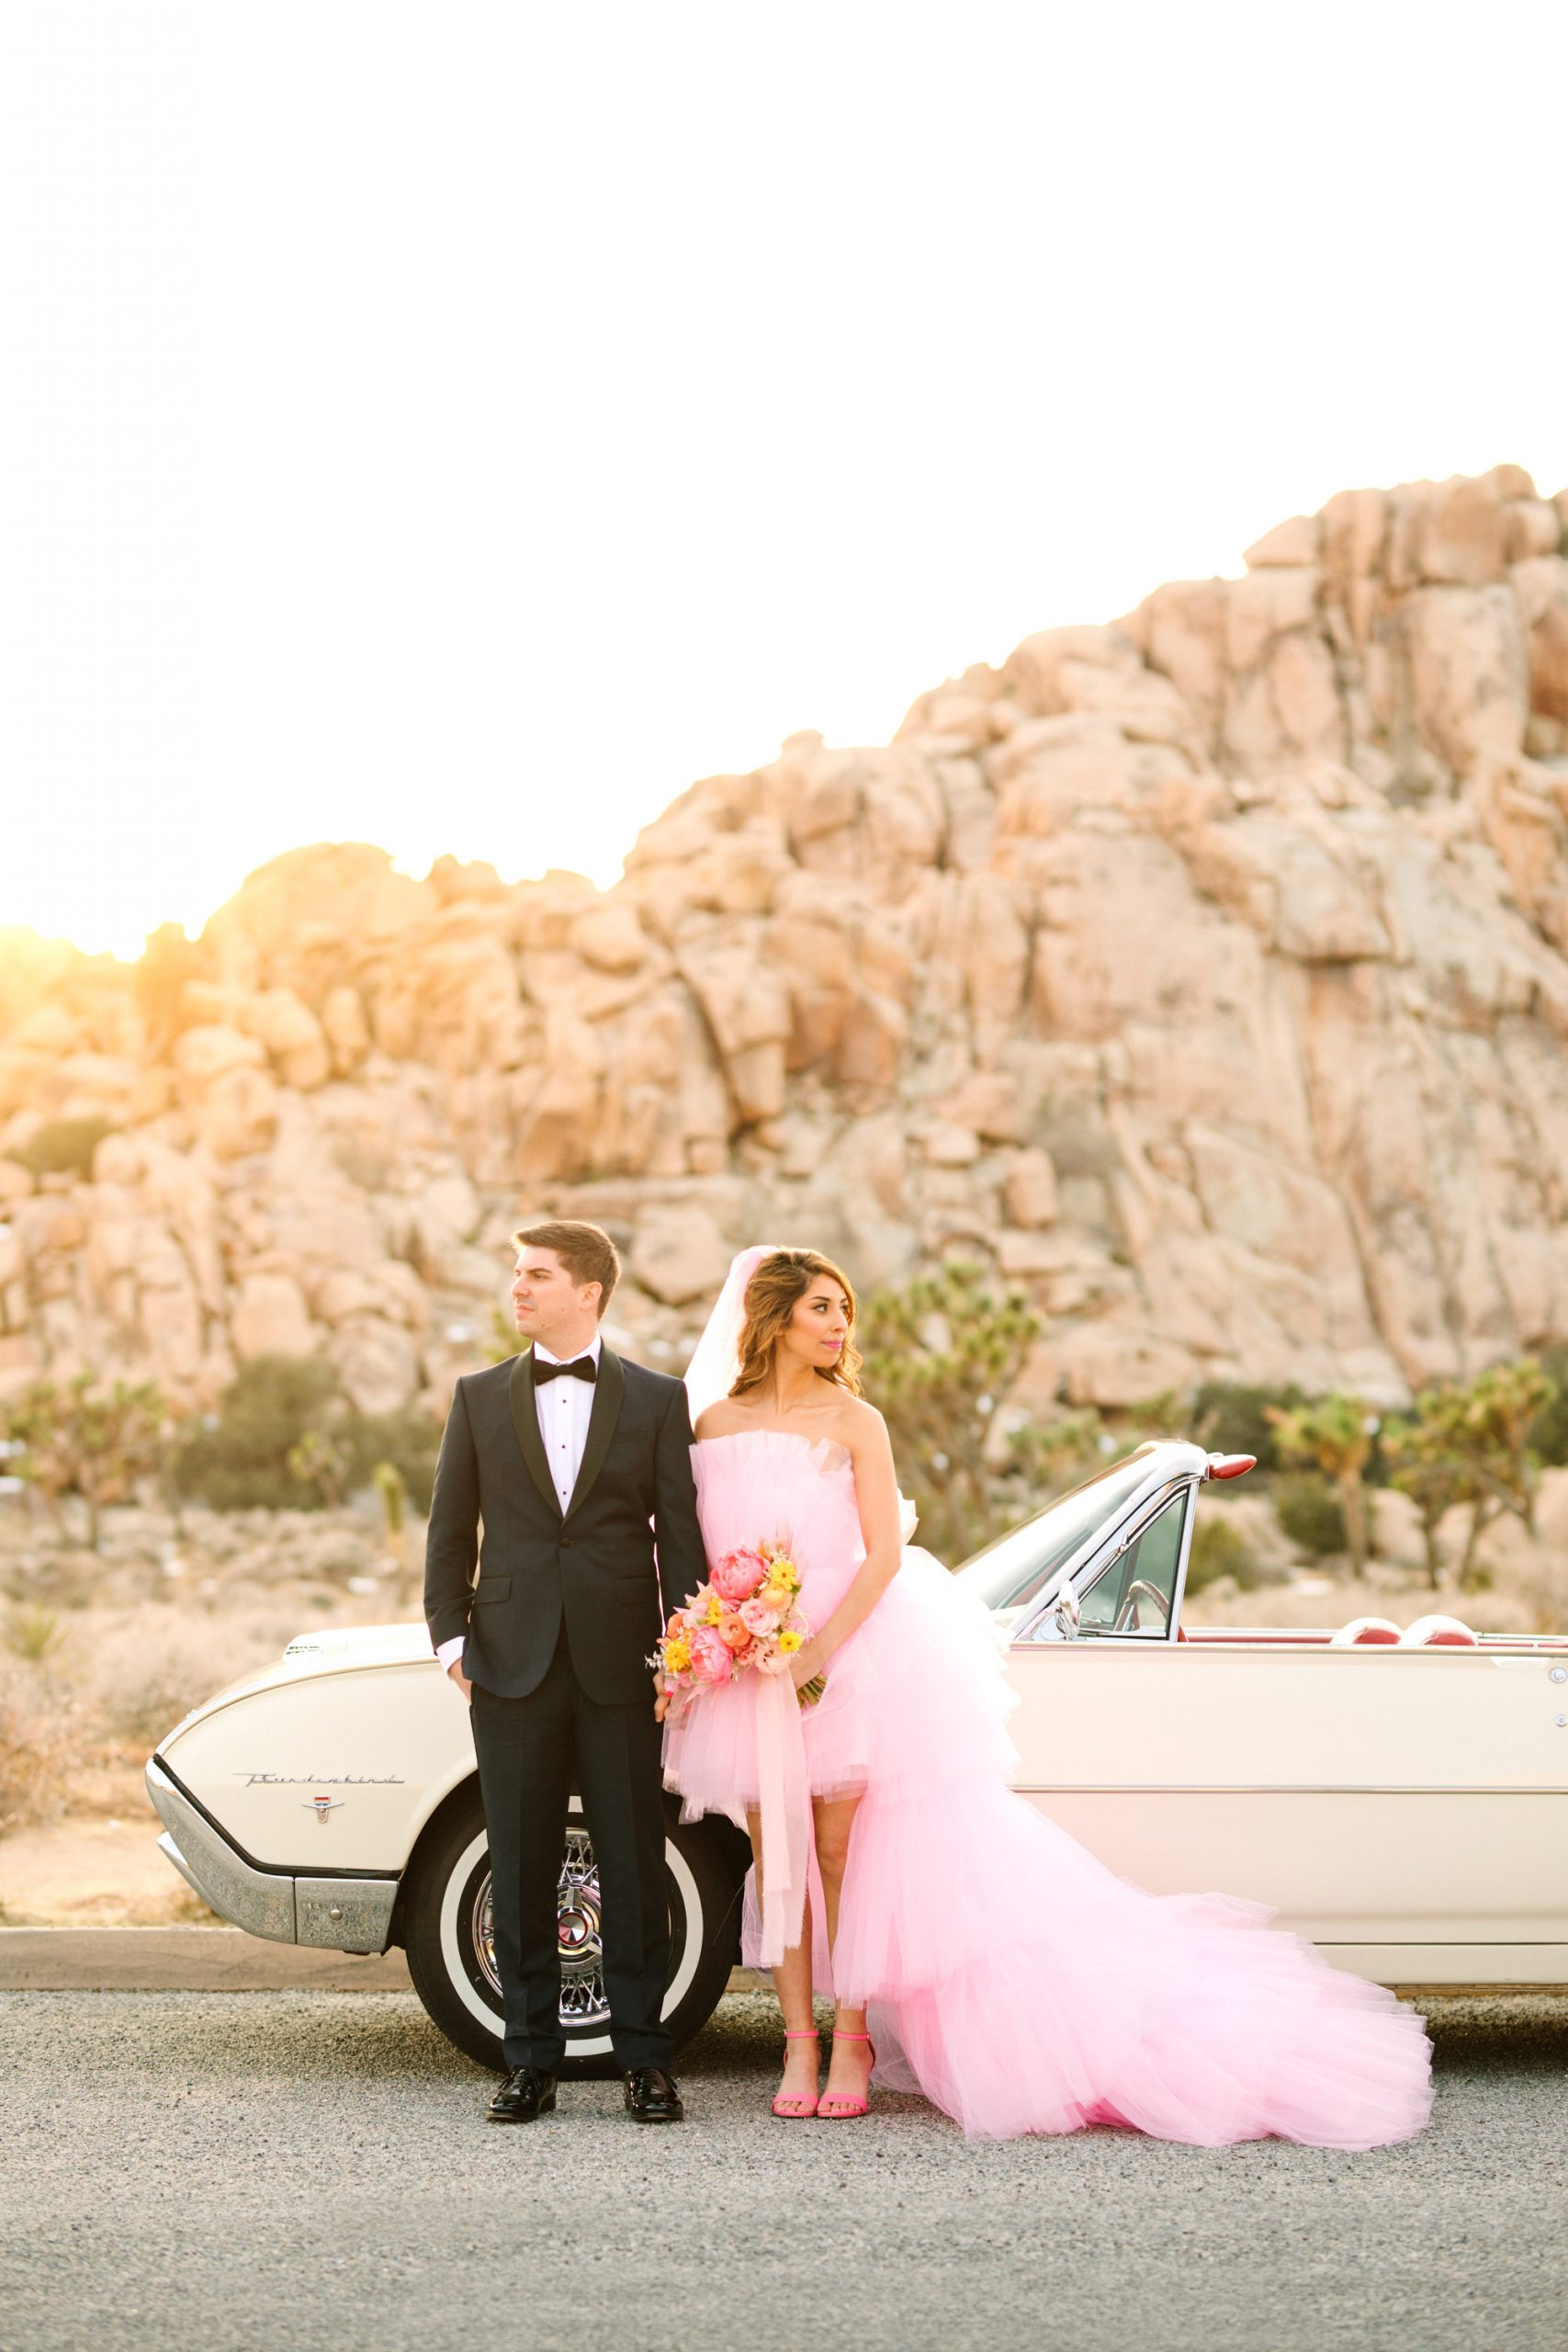 Bride and groom with white classic convertible car | Pink wedding dress Joshua Tree elopement featured on Green Wedding Shoes | Colorful desert wedding inspiration for fun-loving couples in Southern California #joshuatreewedding #joshuatreeelopement #pinkwedding #greenweddingshoes Source: Mary Costa Photography | Los Angeles